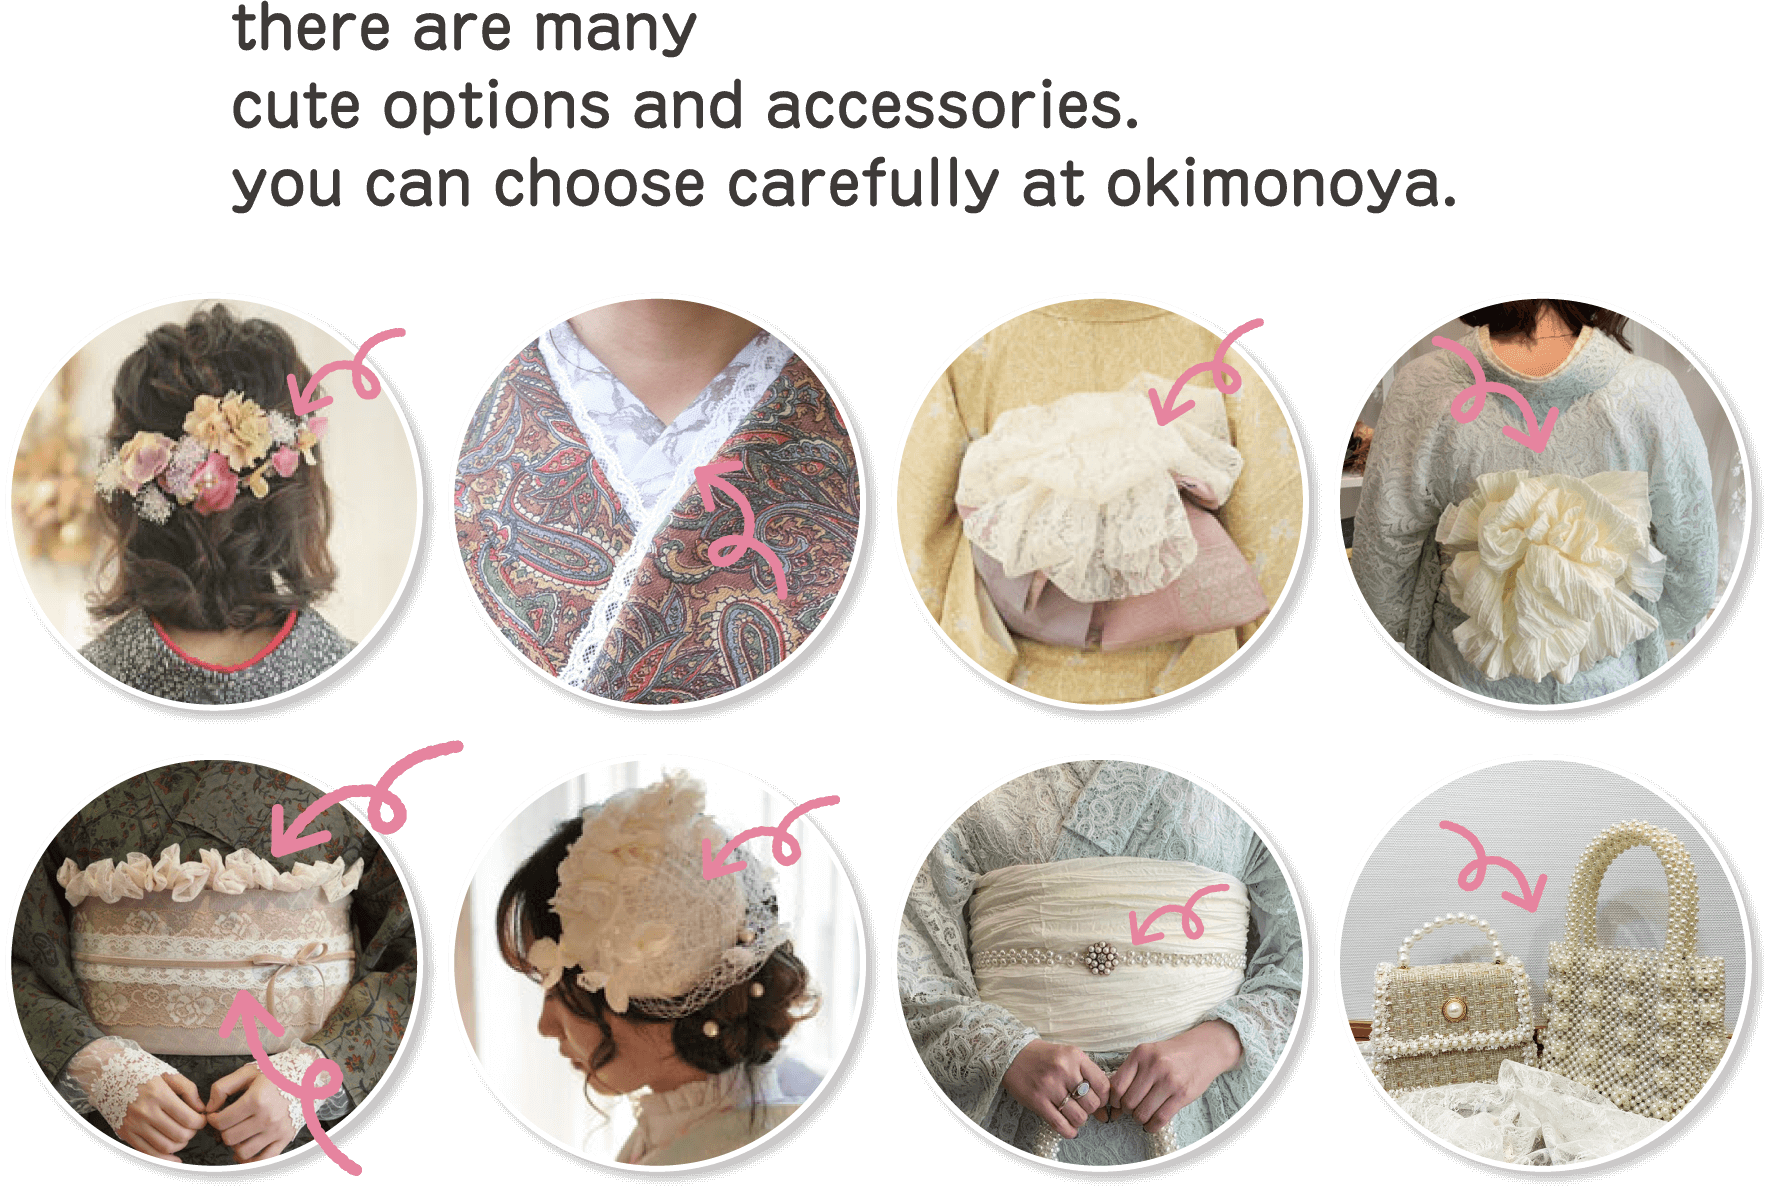 there are many cute options and accessories. you can choose carefully at okimonoya.